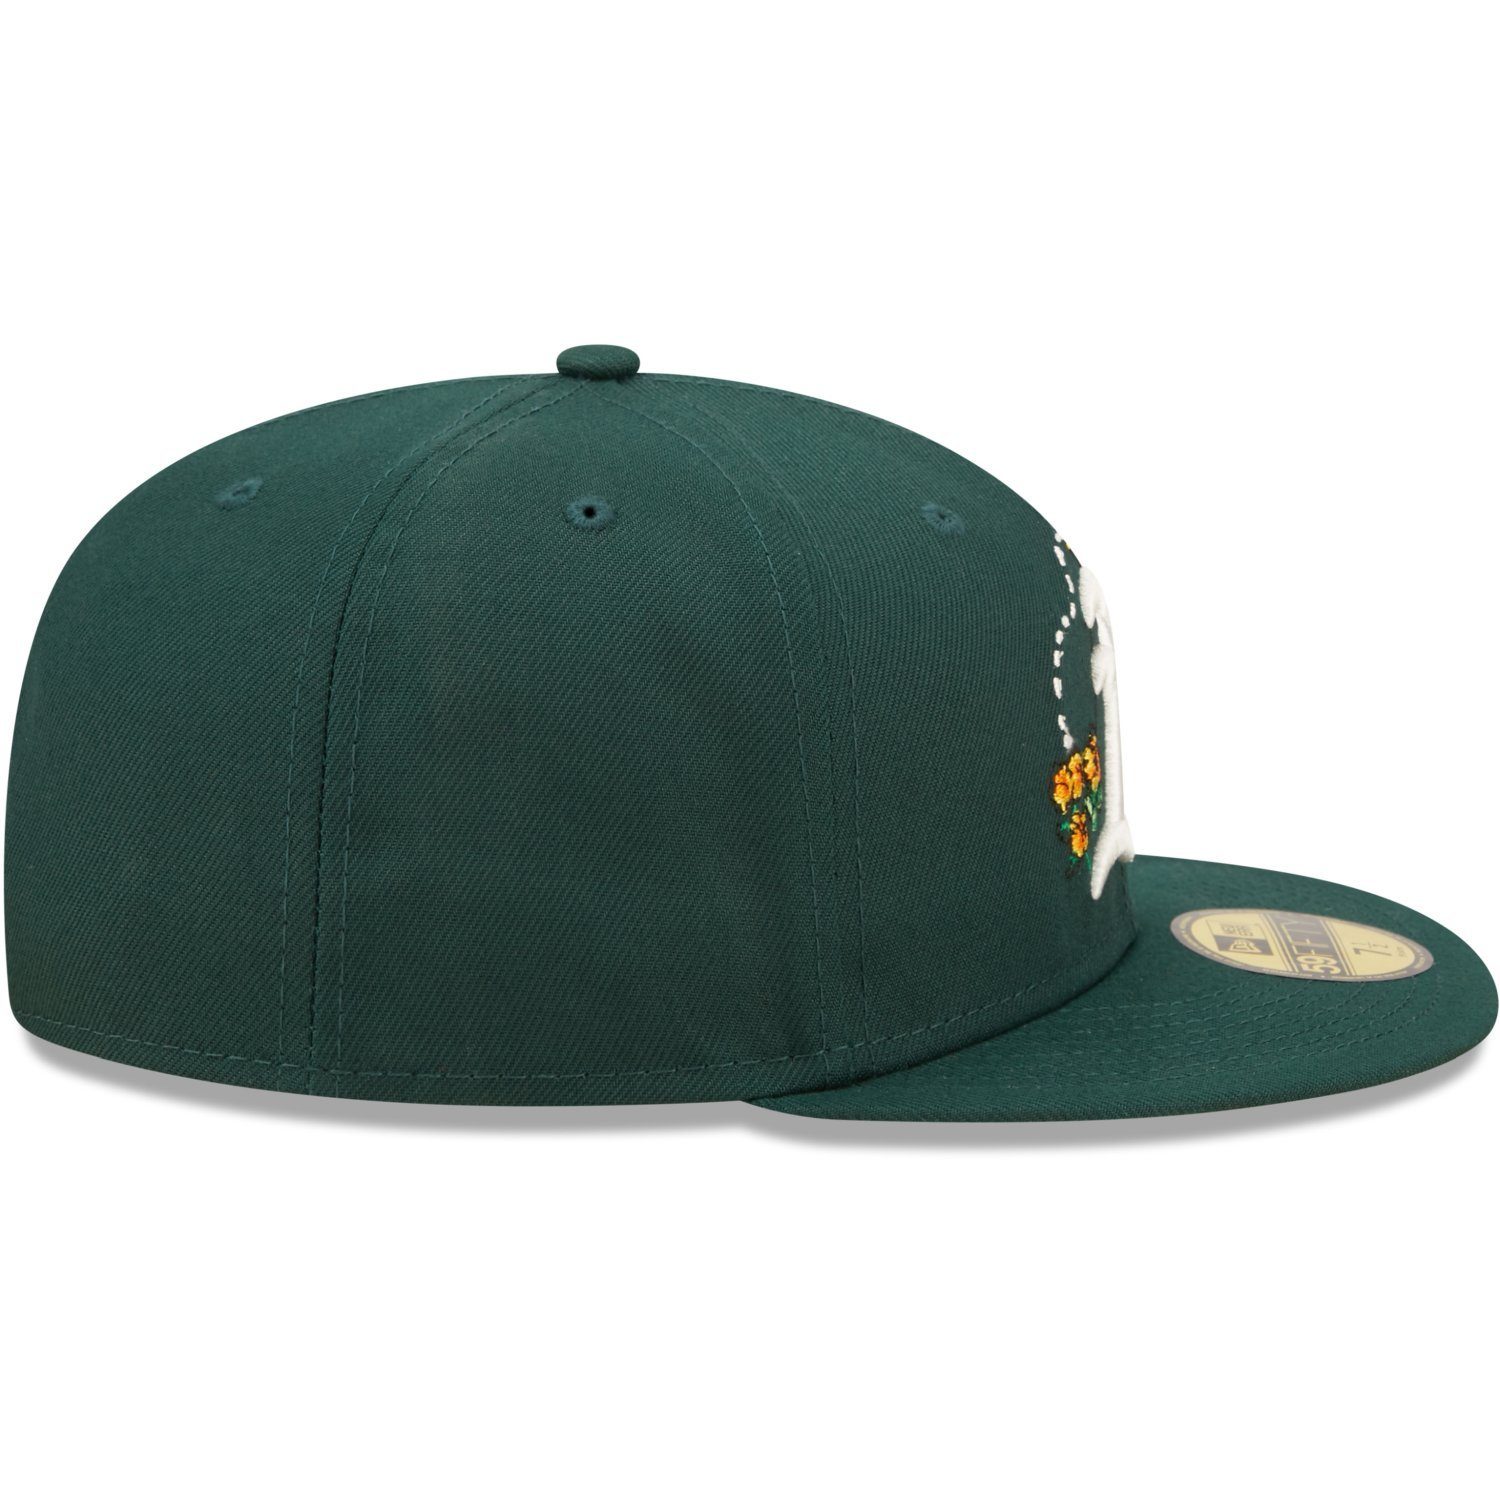 FLORAL 59Fifty New Cap Fitted WATER Athletics Oakland Era